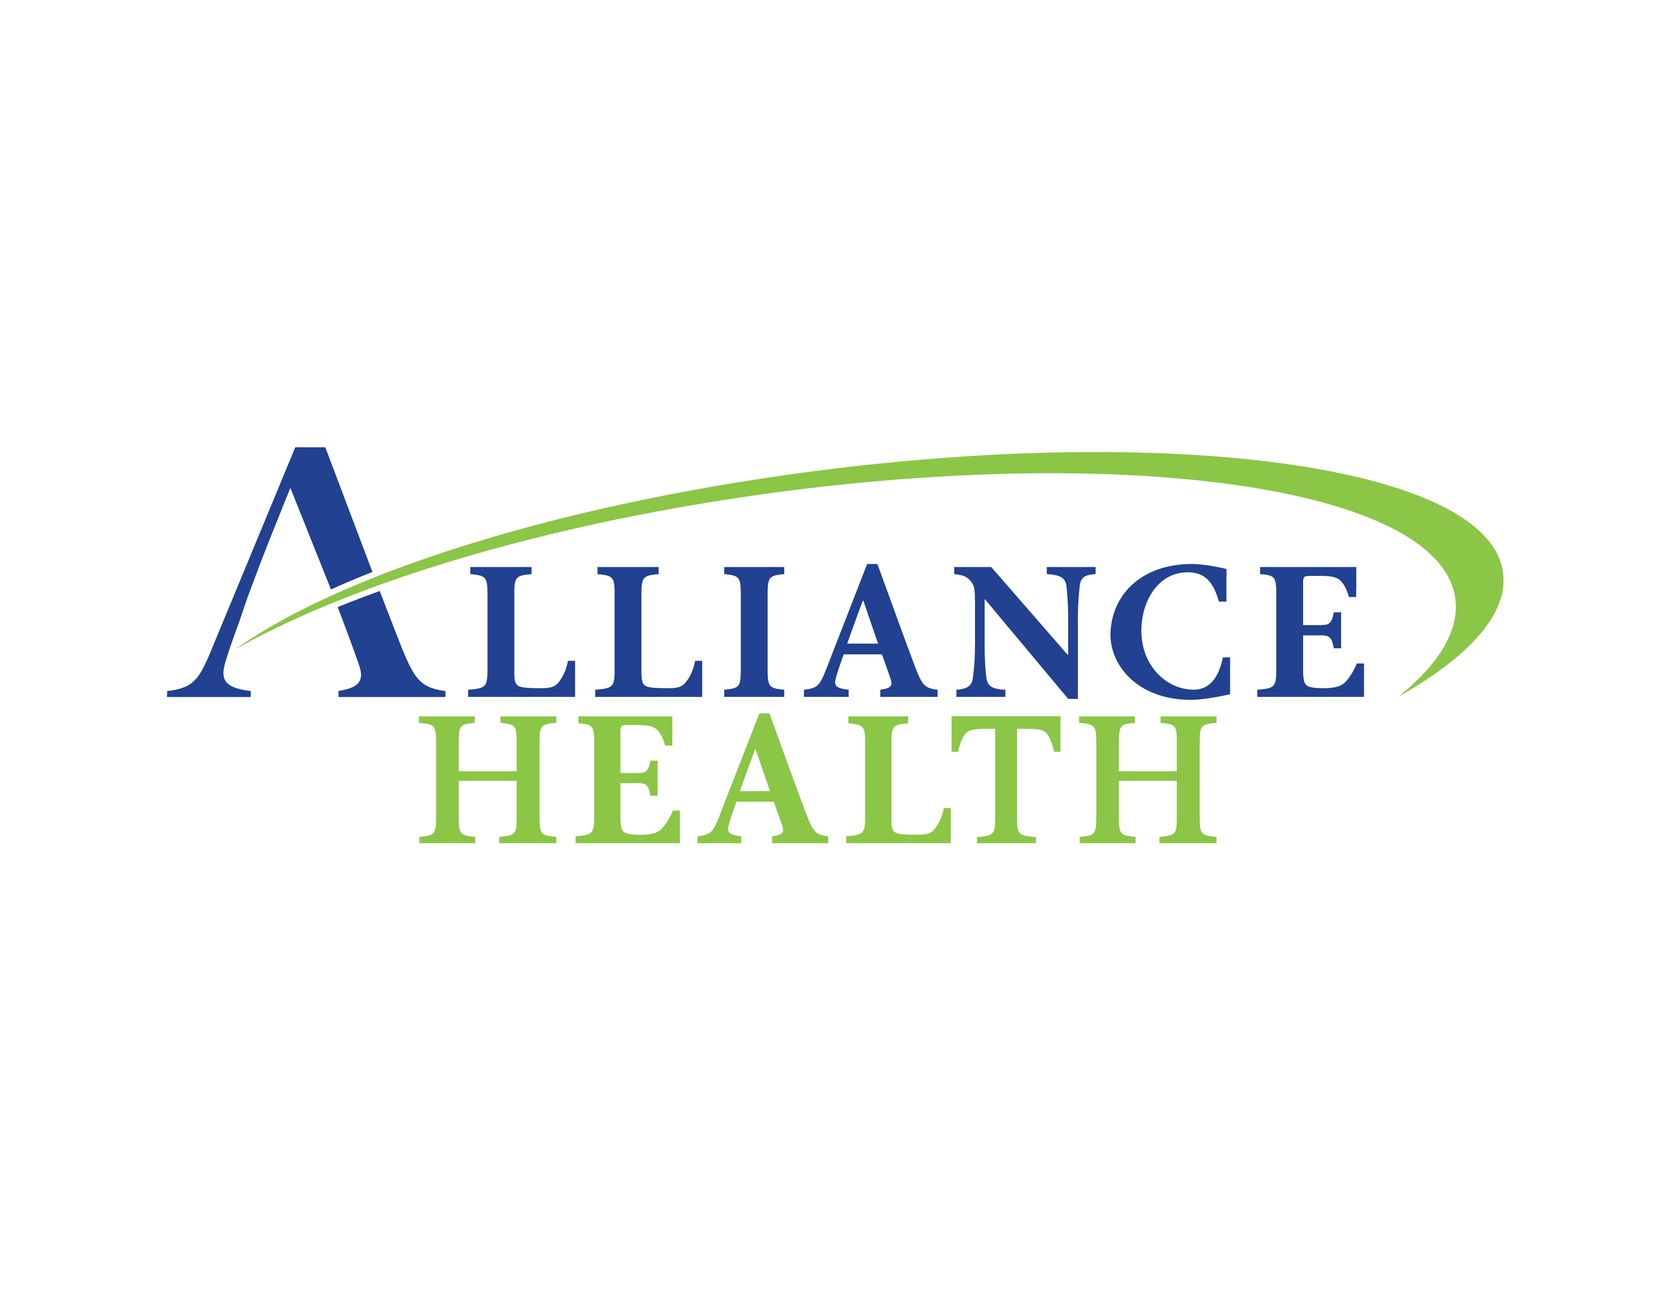 Alliance Health in Blue and Green